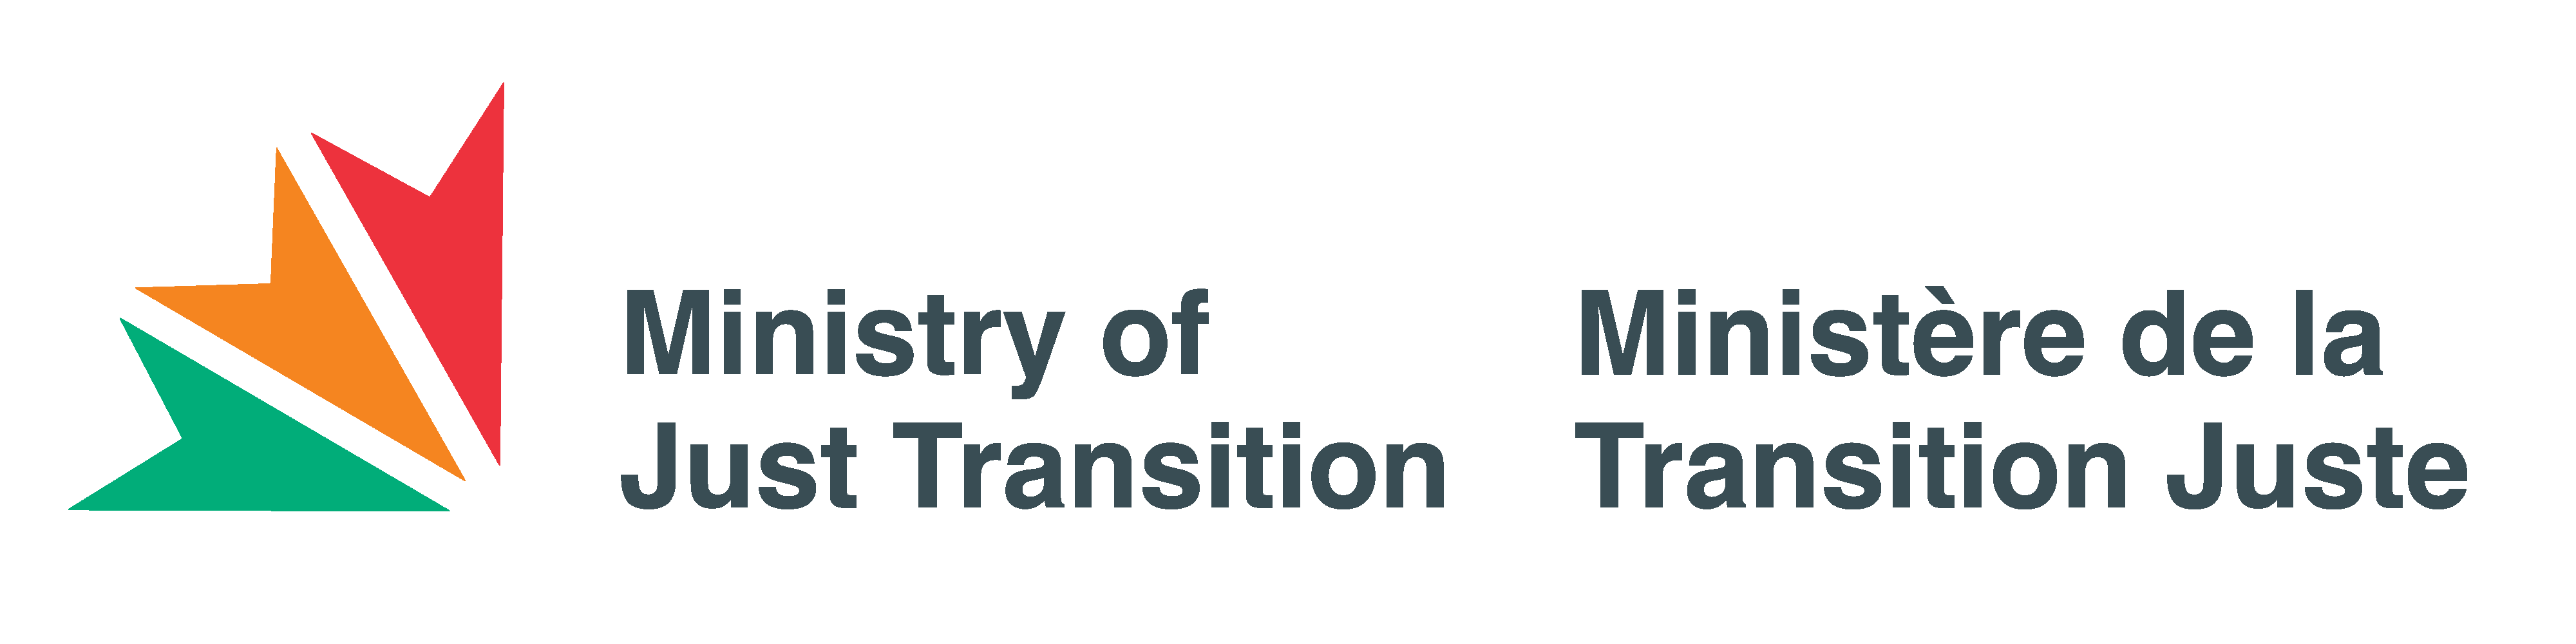 Ministry of Just Transition